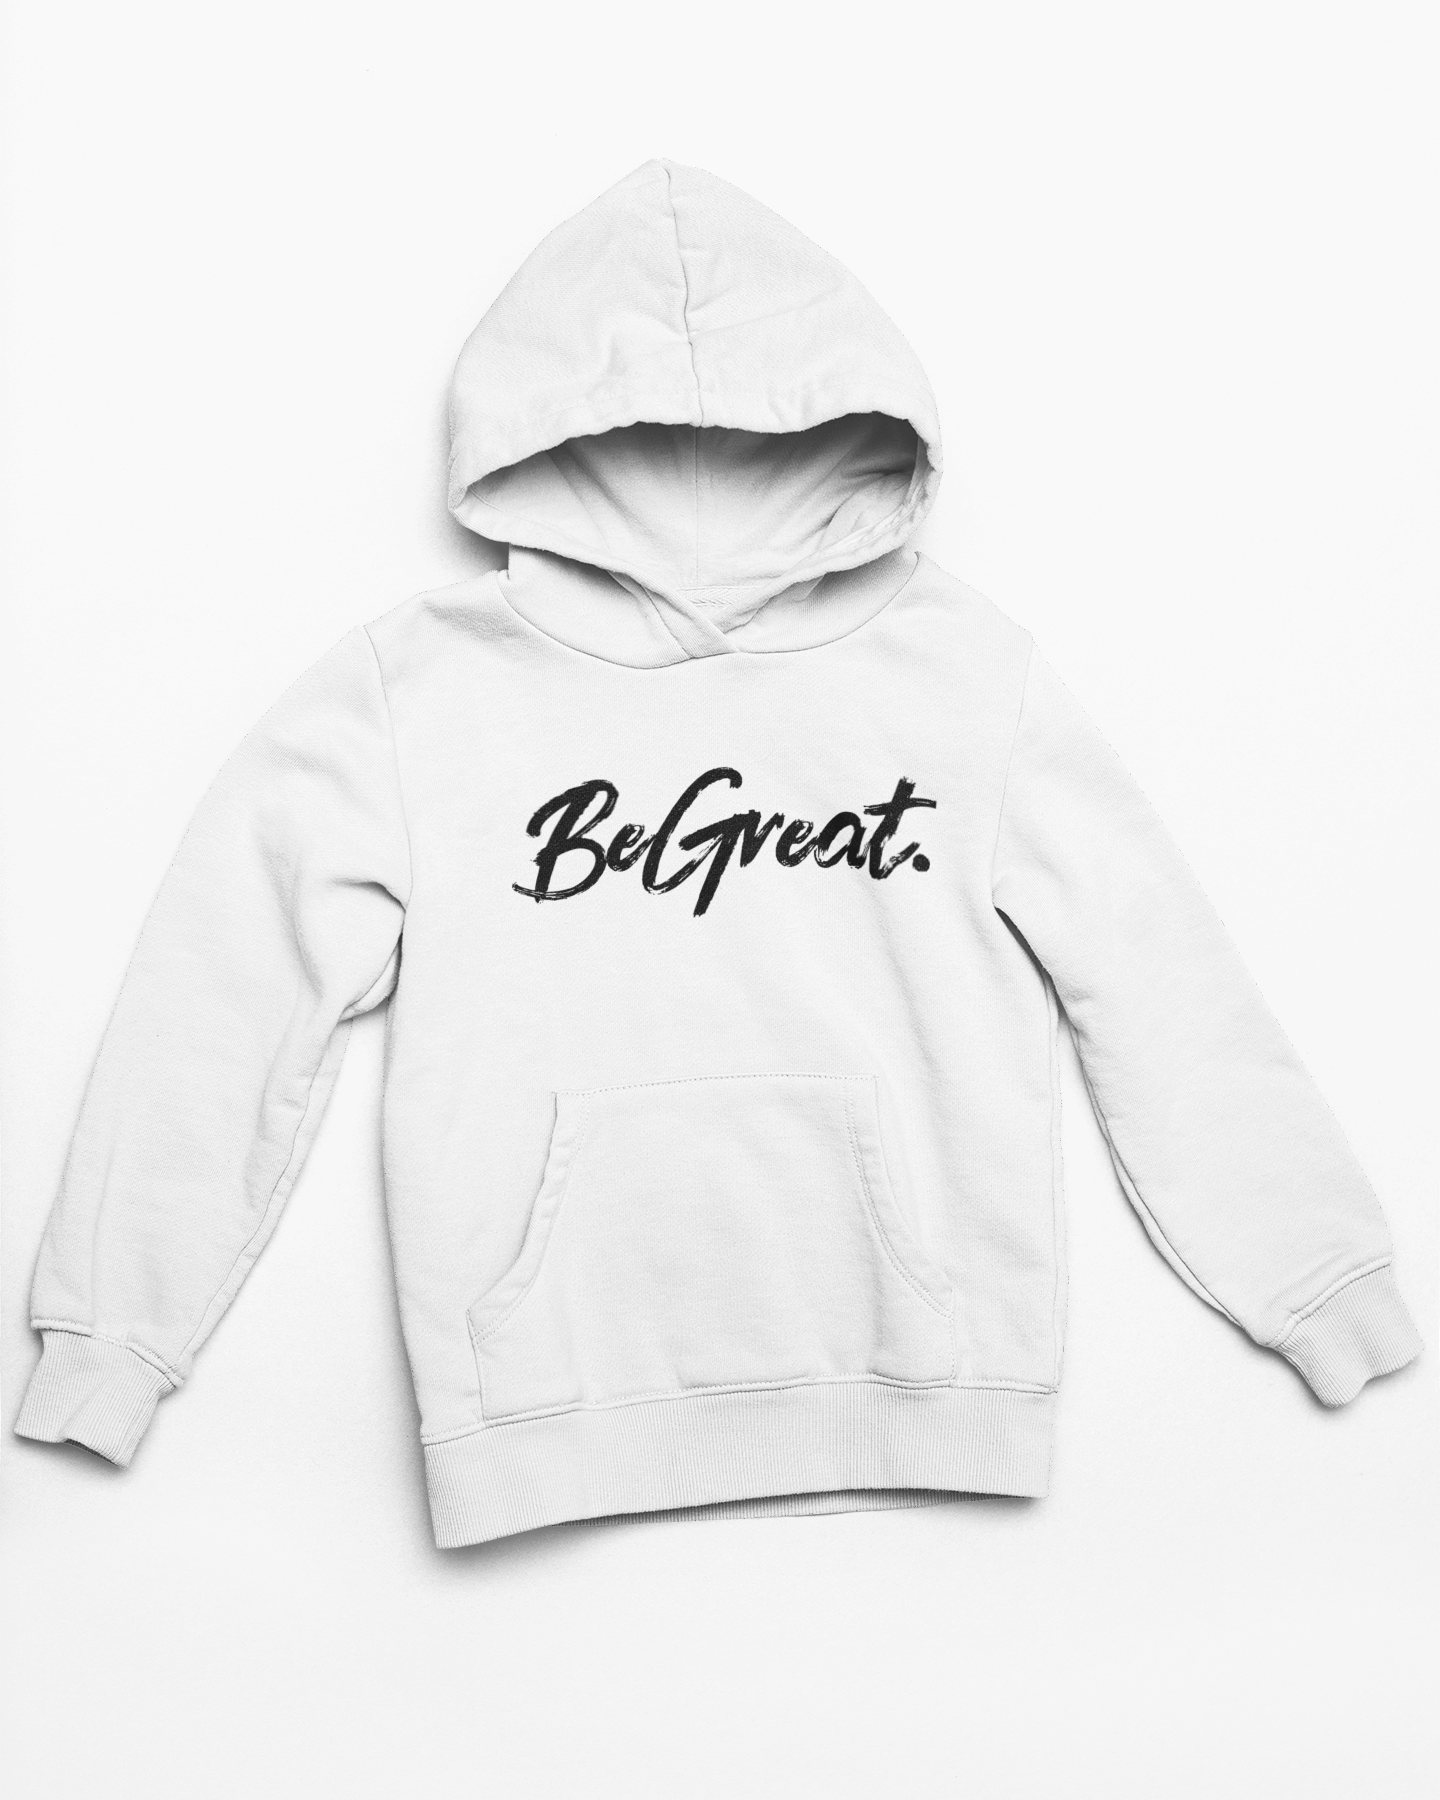 Black and White BeGreat. Hoodie — BeGreat